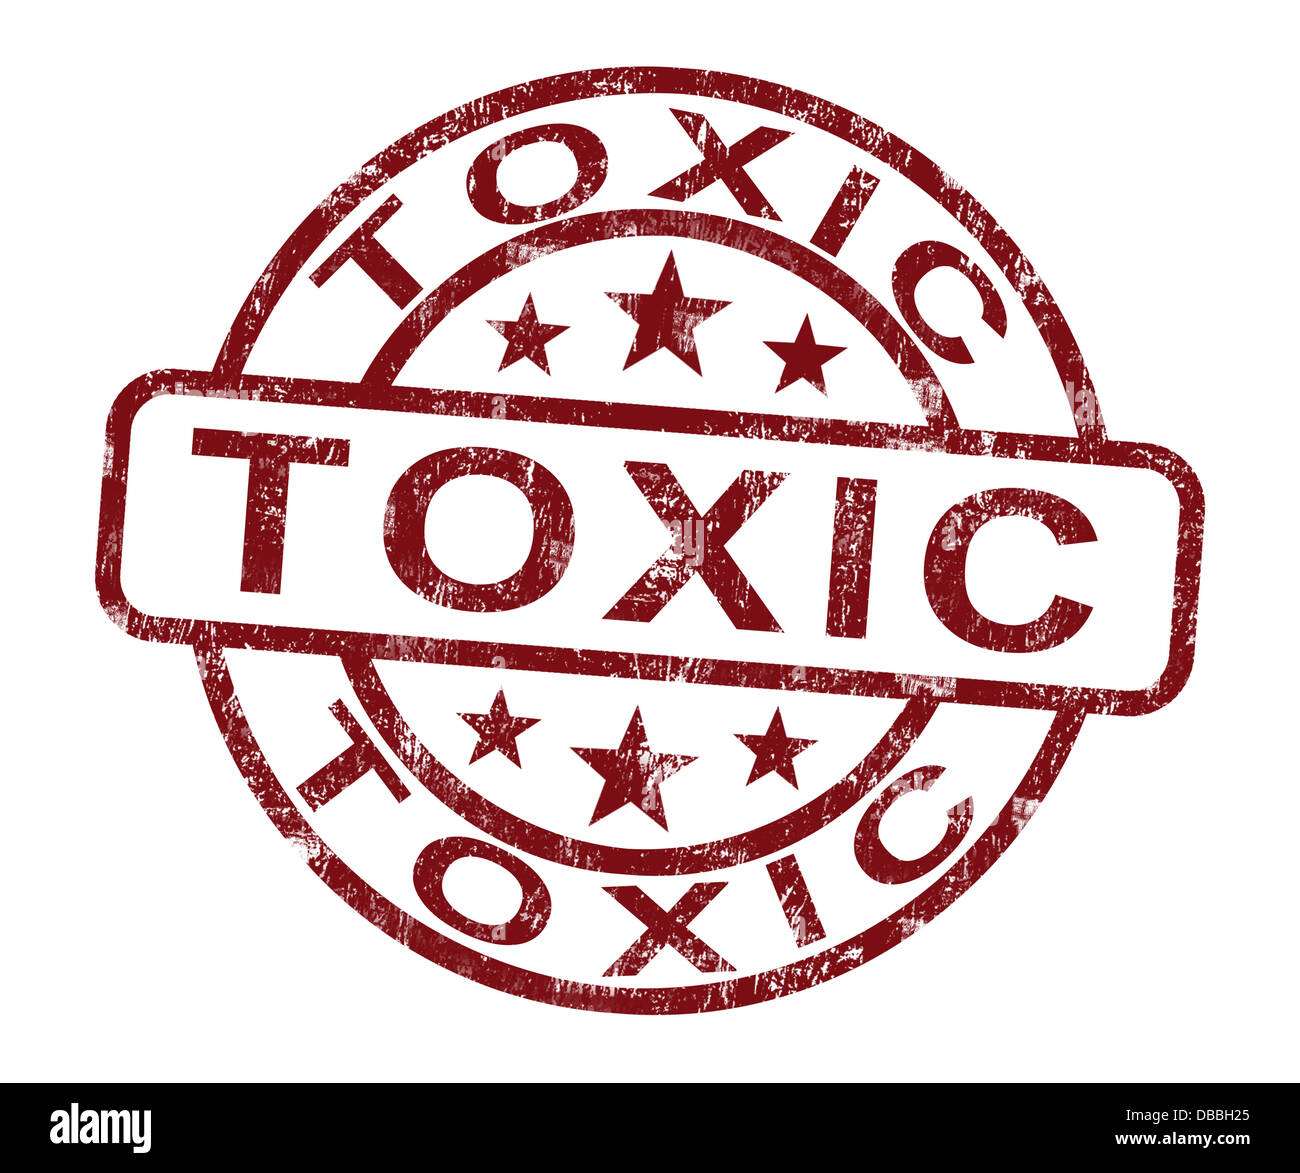 Toxic Stamp Shows Poisonous And Noxious Substance Stock Photo